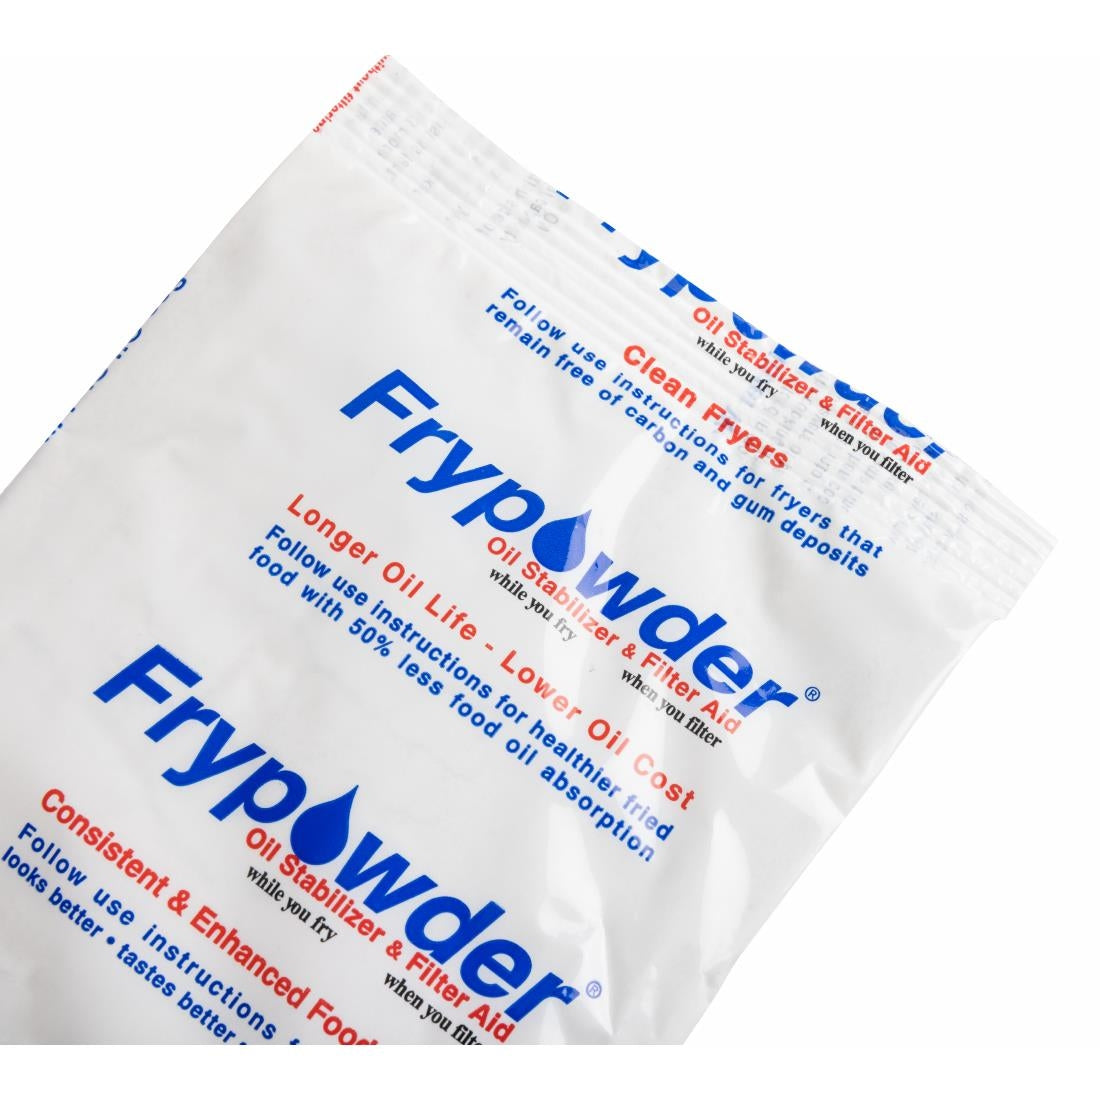 Frypowder (Pack of 72) JD Catering Equipment Solutions Ltd